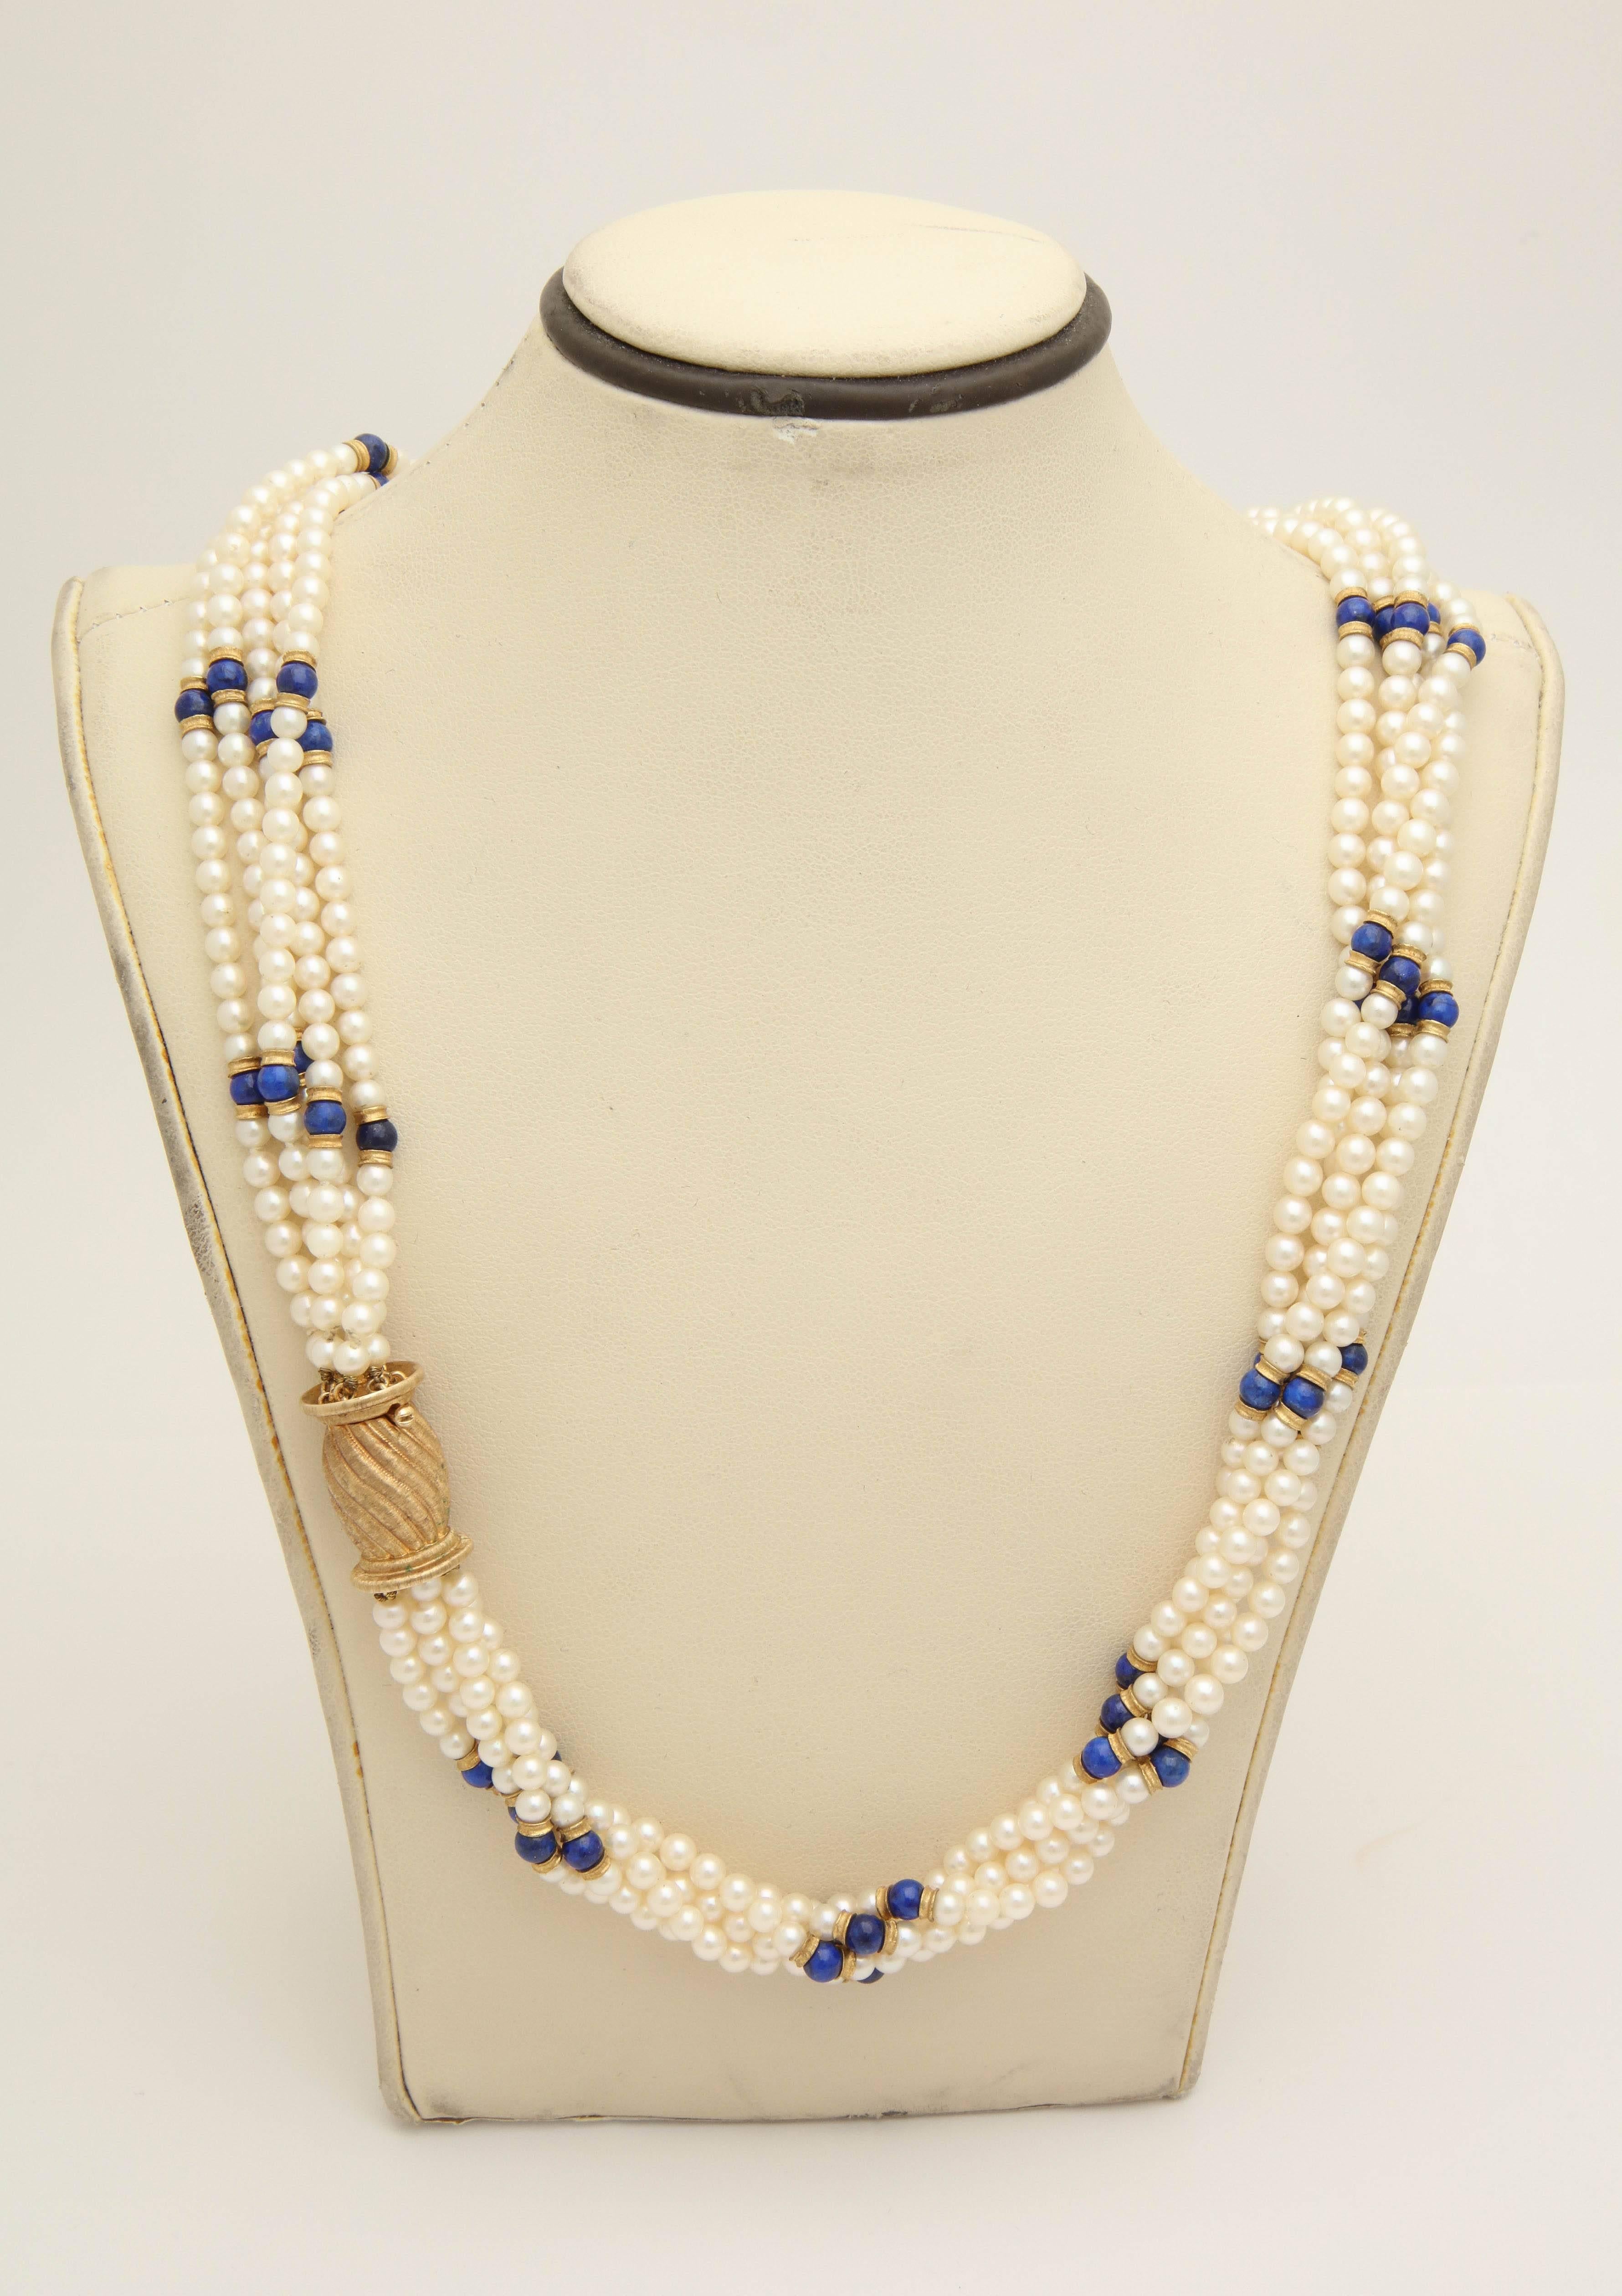 One Ladies 18kt Gold Multi-Strand Necklace Composed Of Numerous 2Mm High Luster And Beautiful Quality Cultured Pearls And Further Designed With Sixty Beautiful Color Lapis Lazuli Beads. Each Lapis Set In between Two 18kt Gold Rondell Pieces. This